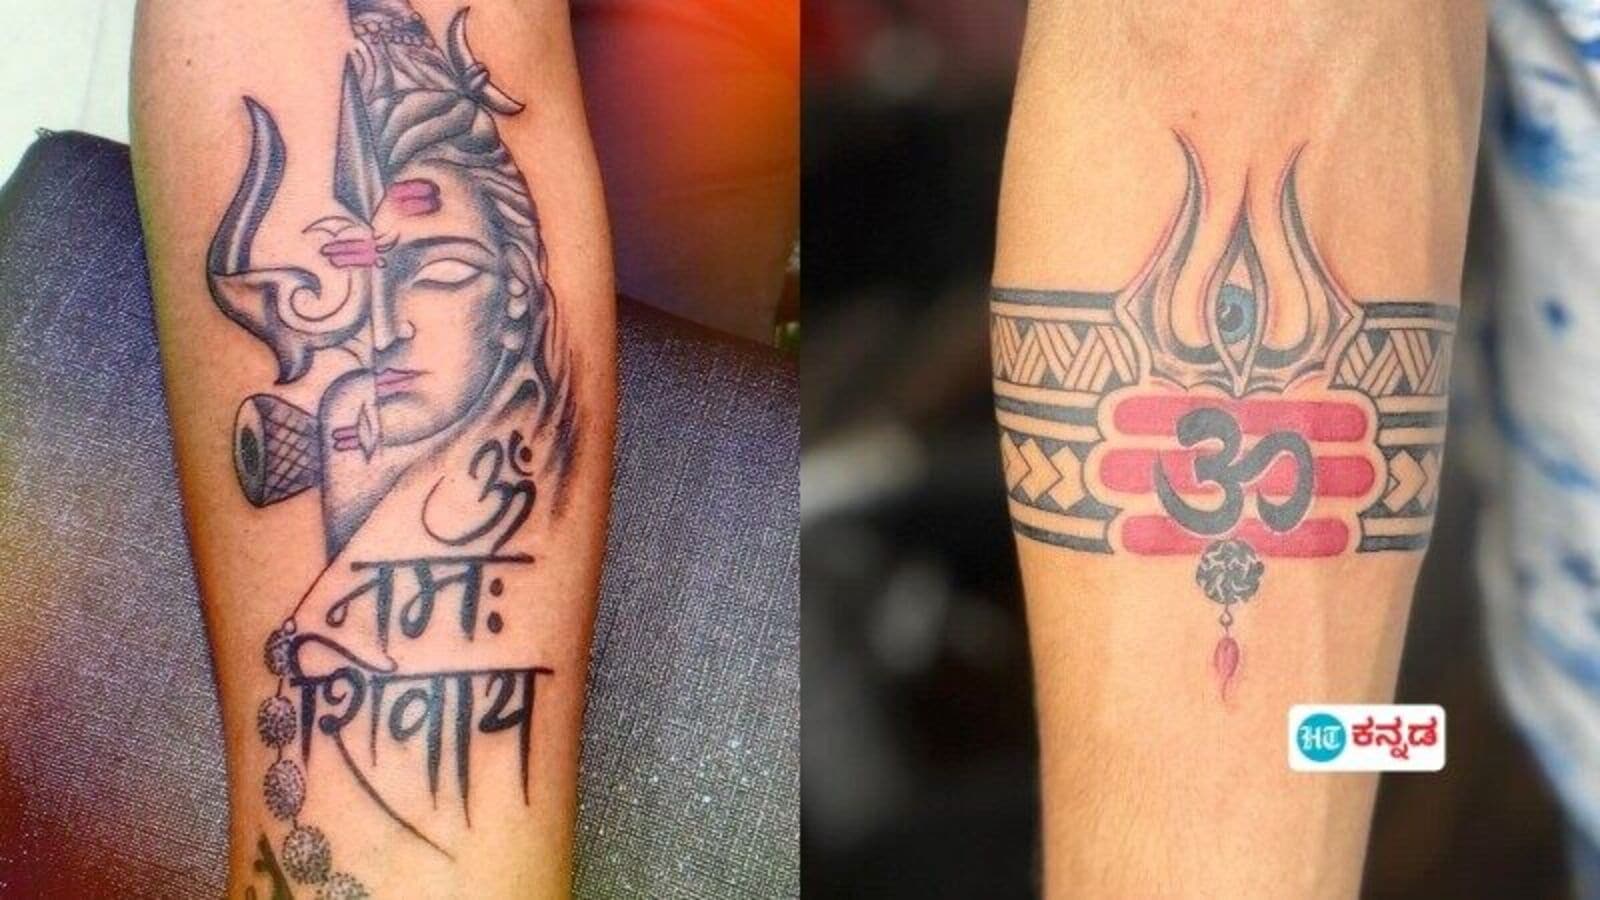 rachitha posted a photo of her tattoo gone viral